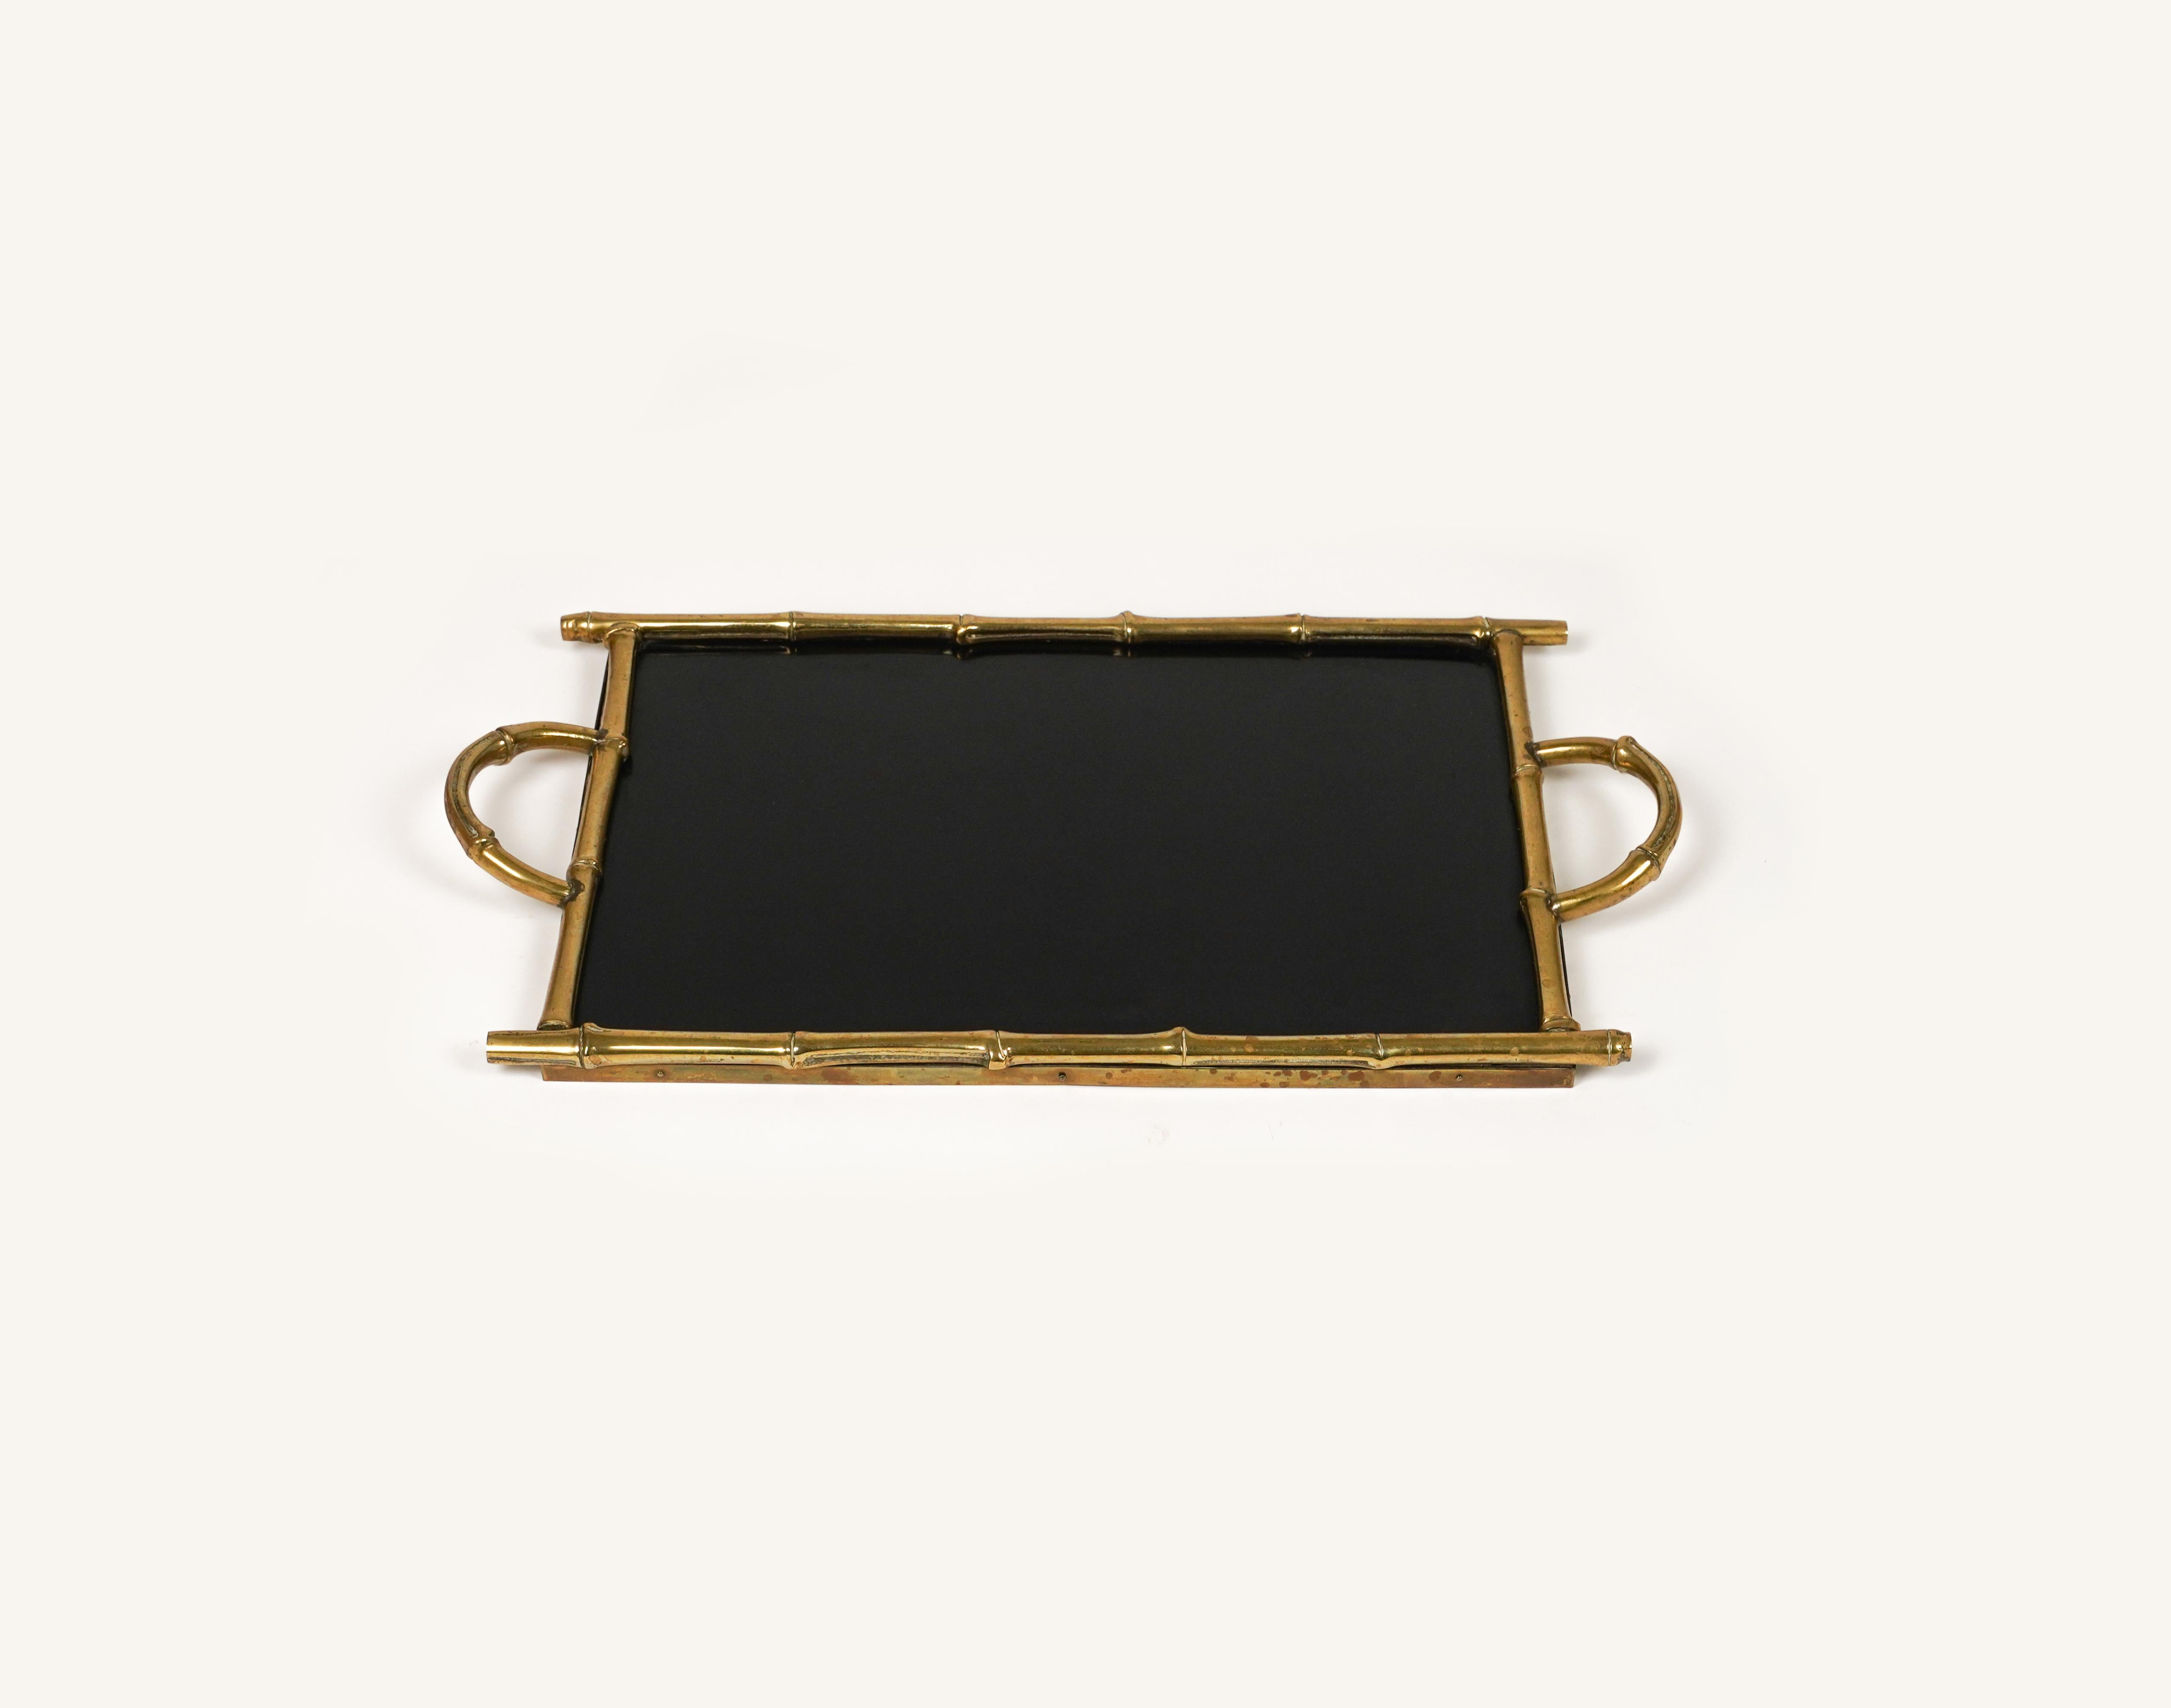 Midcentury amazing serving Tray in faux bamboo effect brass and black laminate attributed to Maison Bagues.

Made in France in the1960s.